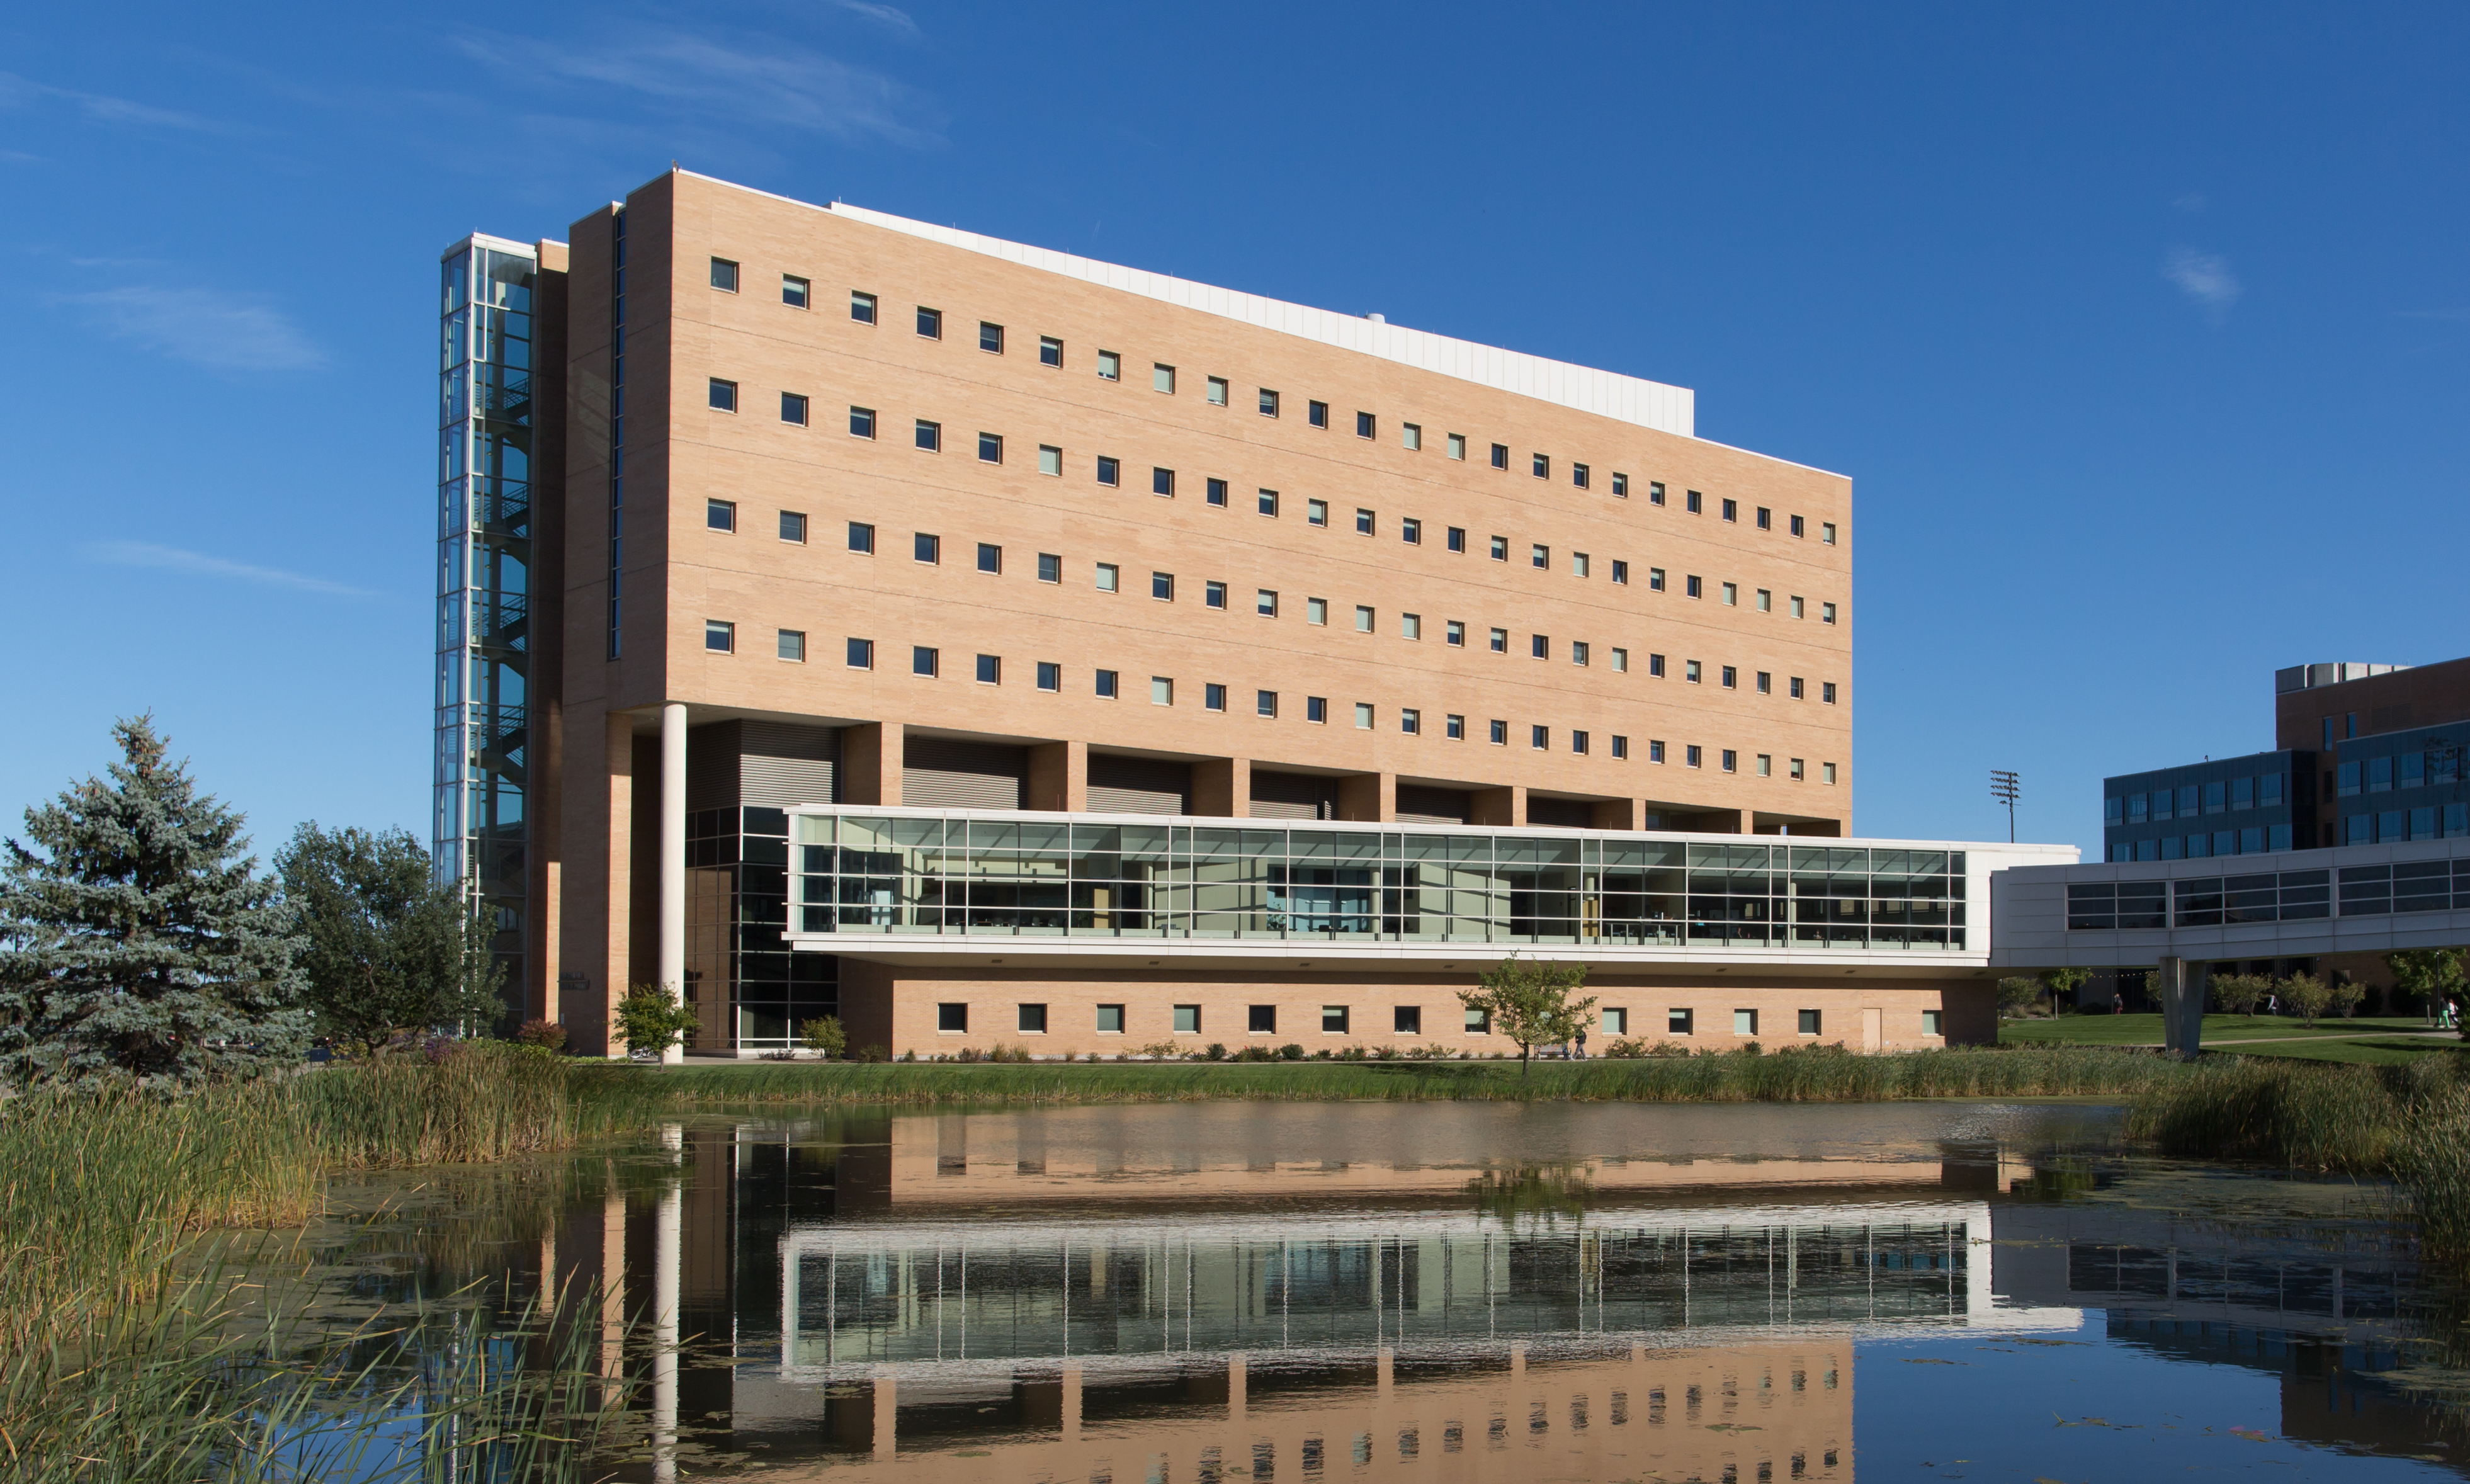 Rennebohm Hall, home of the UW-Madison School of Pharmacy, sits on the west side of campus in the heart of the health sciences hub